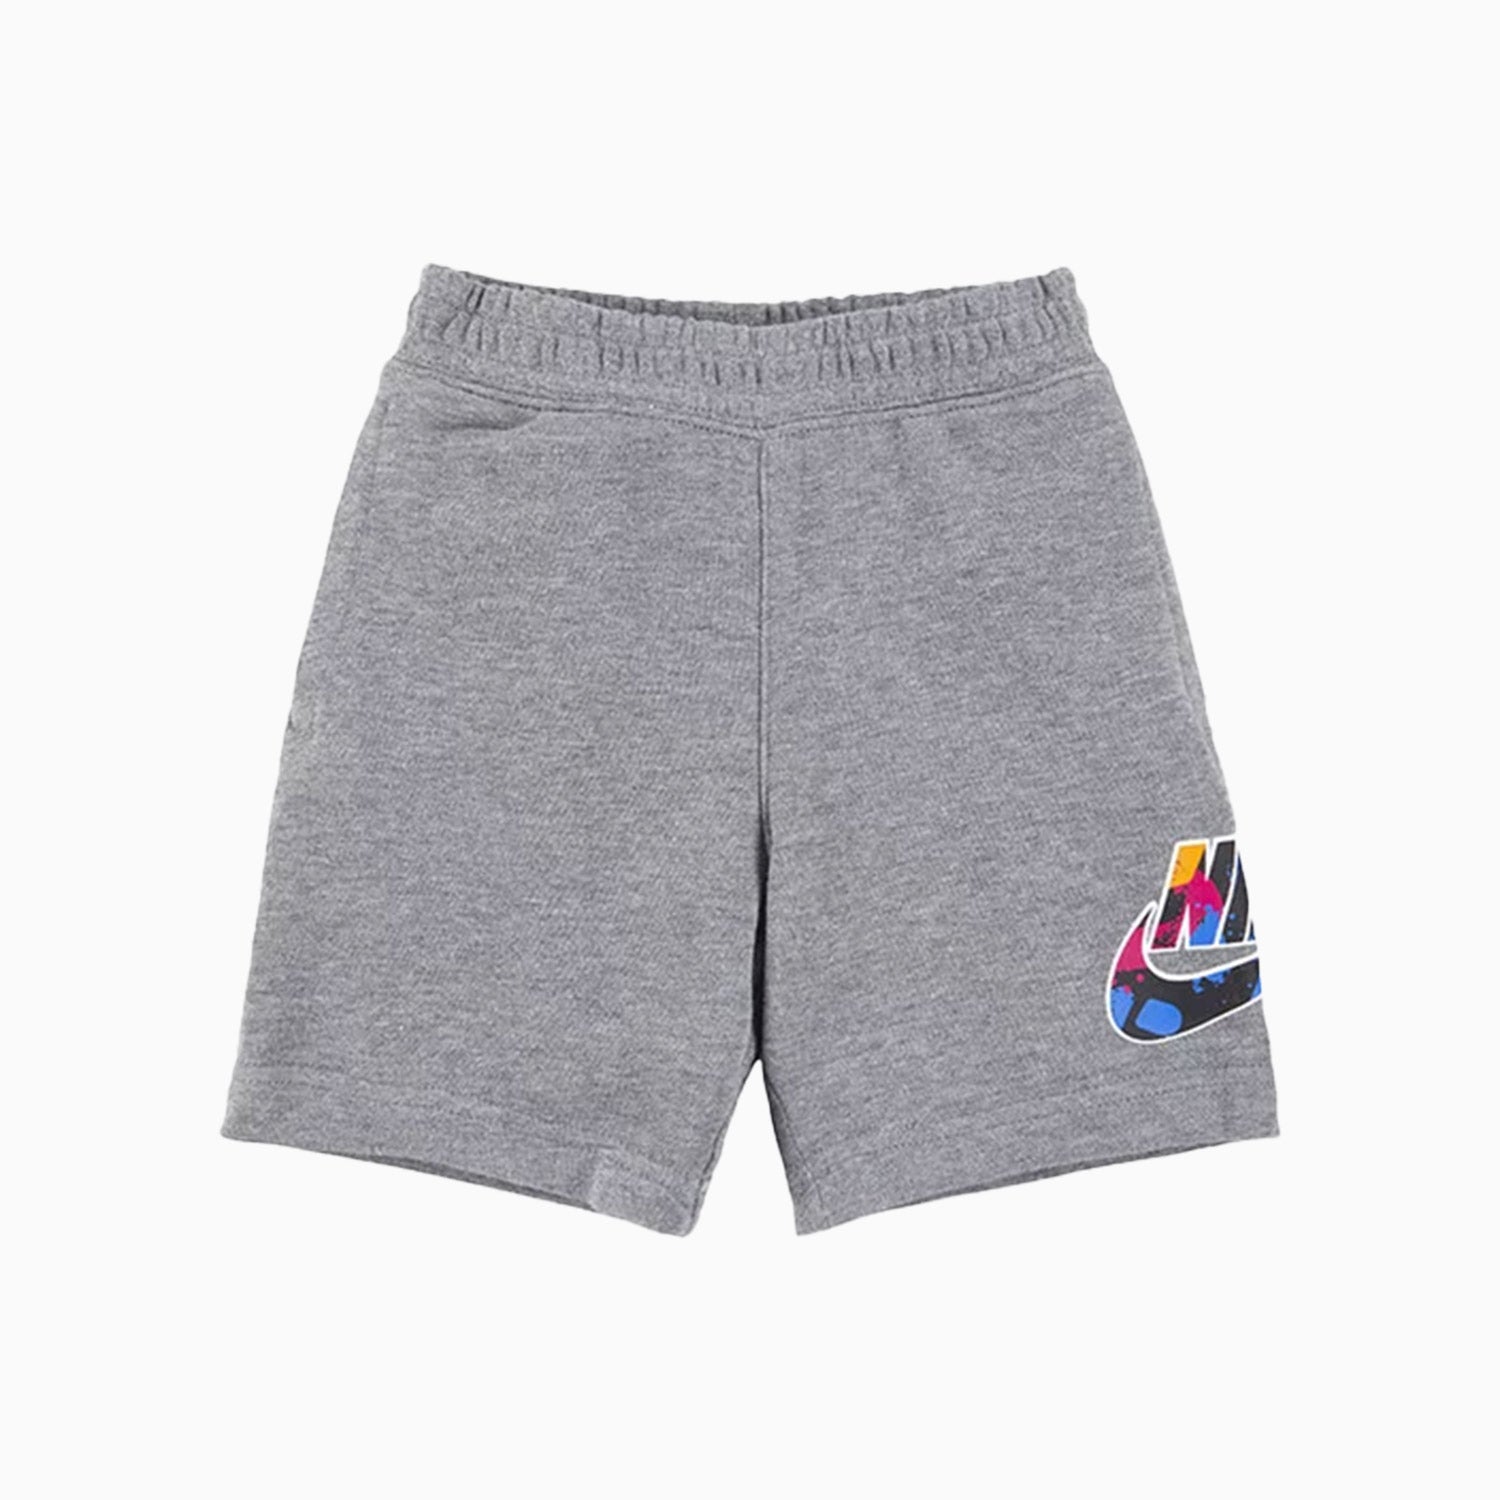 Kid's Sportswear Graphic T Shirt And Shorts Outfit